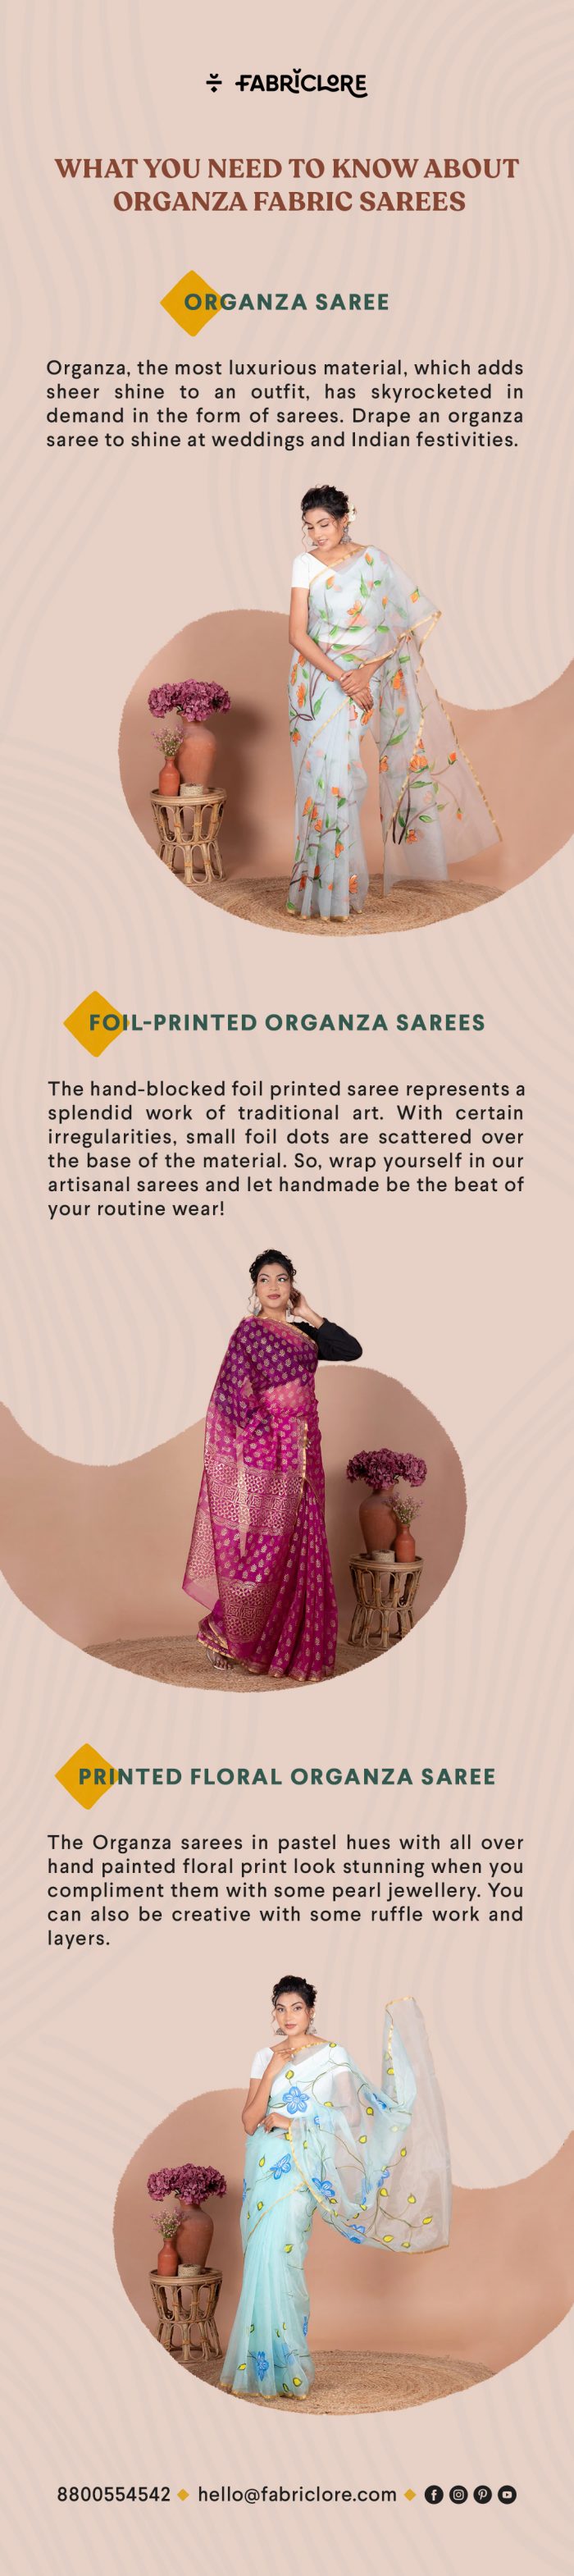 What You Need To Know About Organza Fabric Sarees